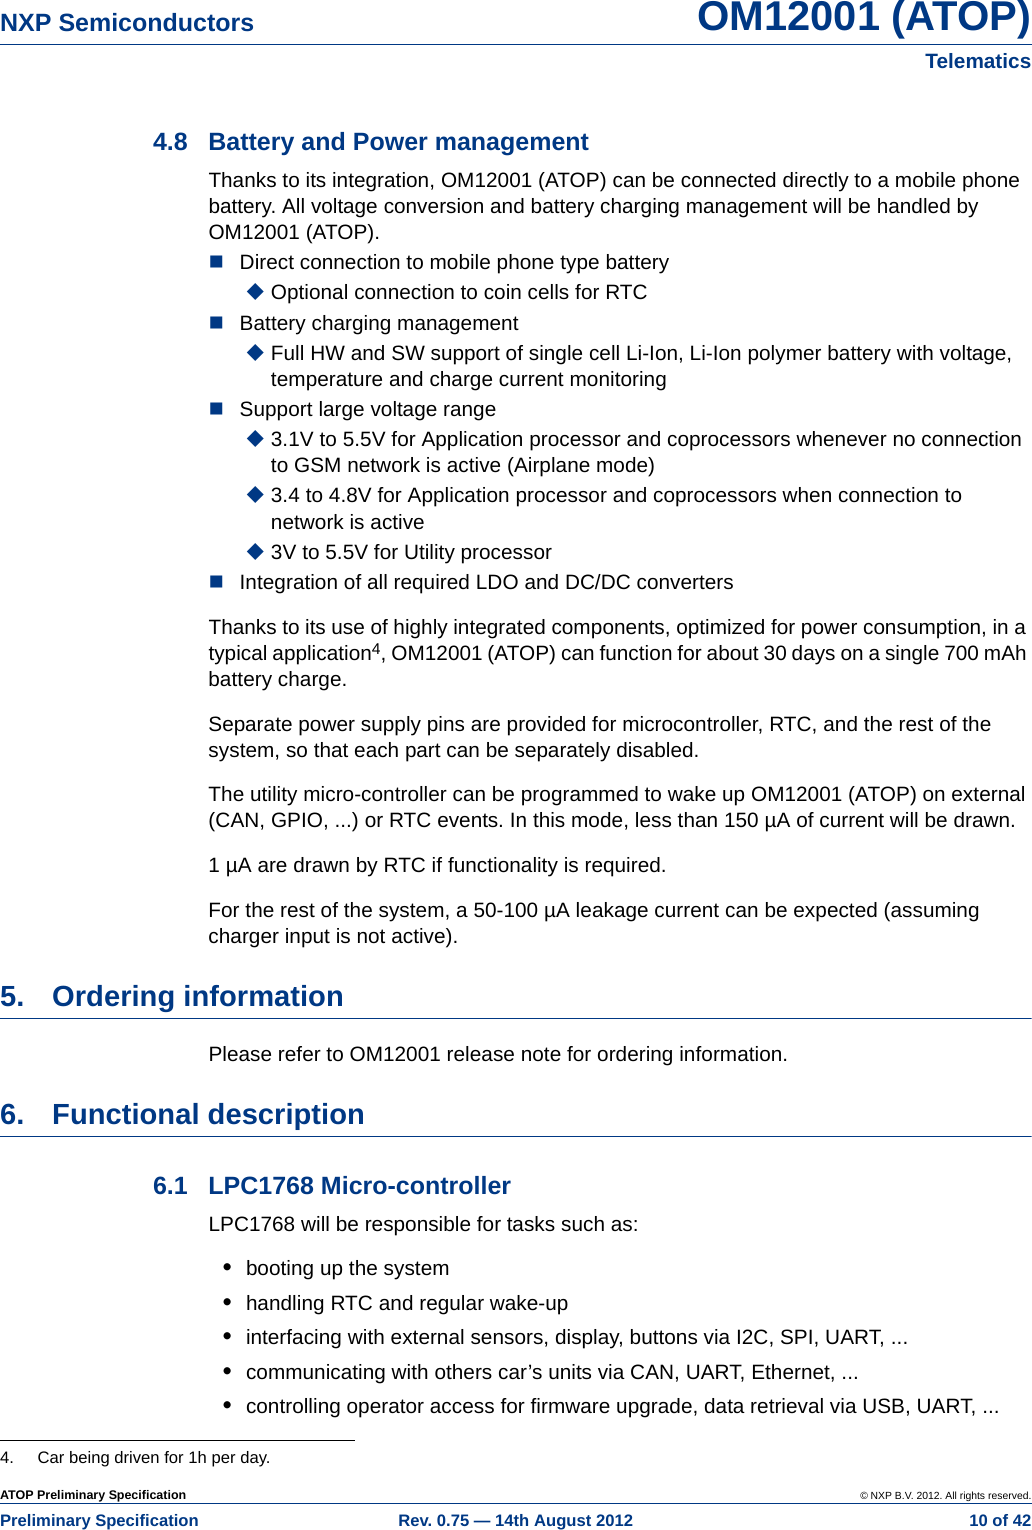 ATOP Preliminary Specification © NXP B.V. 2012. All rights reserved.Preliminary Specification Rev. 0.75 — 14th August 2012  10 of 42NXP Semiconductors OM12001 (ATOP)Telematics4.8 Battery and Power managementThanks to its integration, OM12001 (ATOP) can be connected directly to a mobile phone battery. All voltage conversion and battery charging management will be handled by OM12001 (ATOP).Direct connection to mobile phone type batteryOptional connection to coin cells for RTC Battery charging managementFull HW and SW support of single cell Li-Ion, Li-Ion polymer battery with voltage, temperature and charge current monitoring Support large voltage range3.1V to 5.5V for Application processor and coprocessors whenever no connection to GSM network is active (Airplane mode)3.4 to 4.8V for Application processor and coprocessors when connection to network is active3V to 5.5V for Utility processorIntegration of all required LDO and DC/DC convertersThanks to its use of highly integrated components, optimized for power consumption, in a typical application4, OM12001 (ATOP) can function for about 30 days on a single 700 mAh battery charge.Separate power supply pins are provided for microcontroller, RTC, and the rest of the system, so that each part can be separately disabled.The utility micro-controller can be programmed to wake up OM12001 (ATOP) on external (CAN, GPIO, ...) or RTC events. In this mode, less than 150 µA of current will be drawn.1 µA are drawn by RTC if functionality is required.For the rest of the system, a 50-100 µA leakage current can be expected (assuming charger input is not active).5. Ordering informationPlease refer to OM12001 release note for ordering information.6. Functional description6.1 LPC1768 Micro-controllerLPC1768 will be responsible for tasks such as:•booting up the system•handling RTC and regular wake-up•interfacing with external sensors, display, buttons via I2C, SPI, UART, ...•communicating with others car’s units via CAN, UART, Ethernet, ...•controlling operator access for firmware upgrade, data retrieval via USB, UART, ...4. Car being driven for 1h per day.